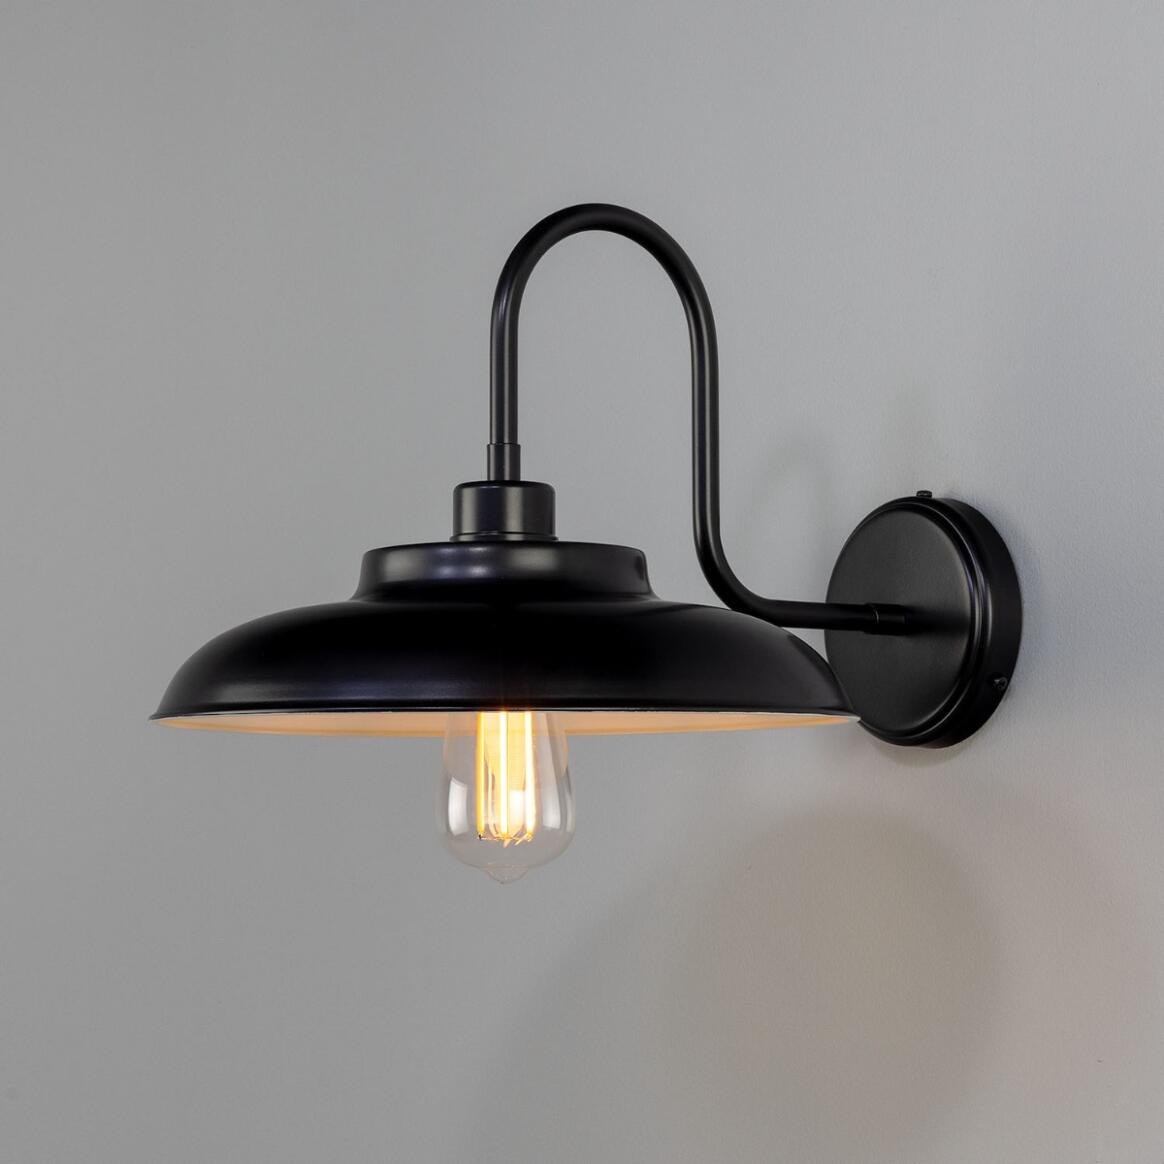 Telal Industrial Brass Factory Swan Neck Wall Light 12.4" main product image